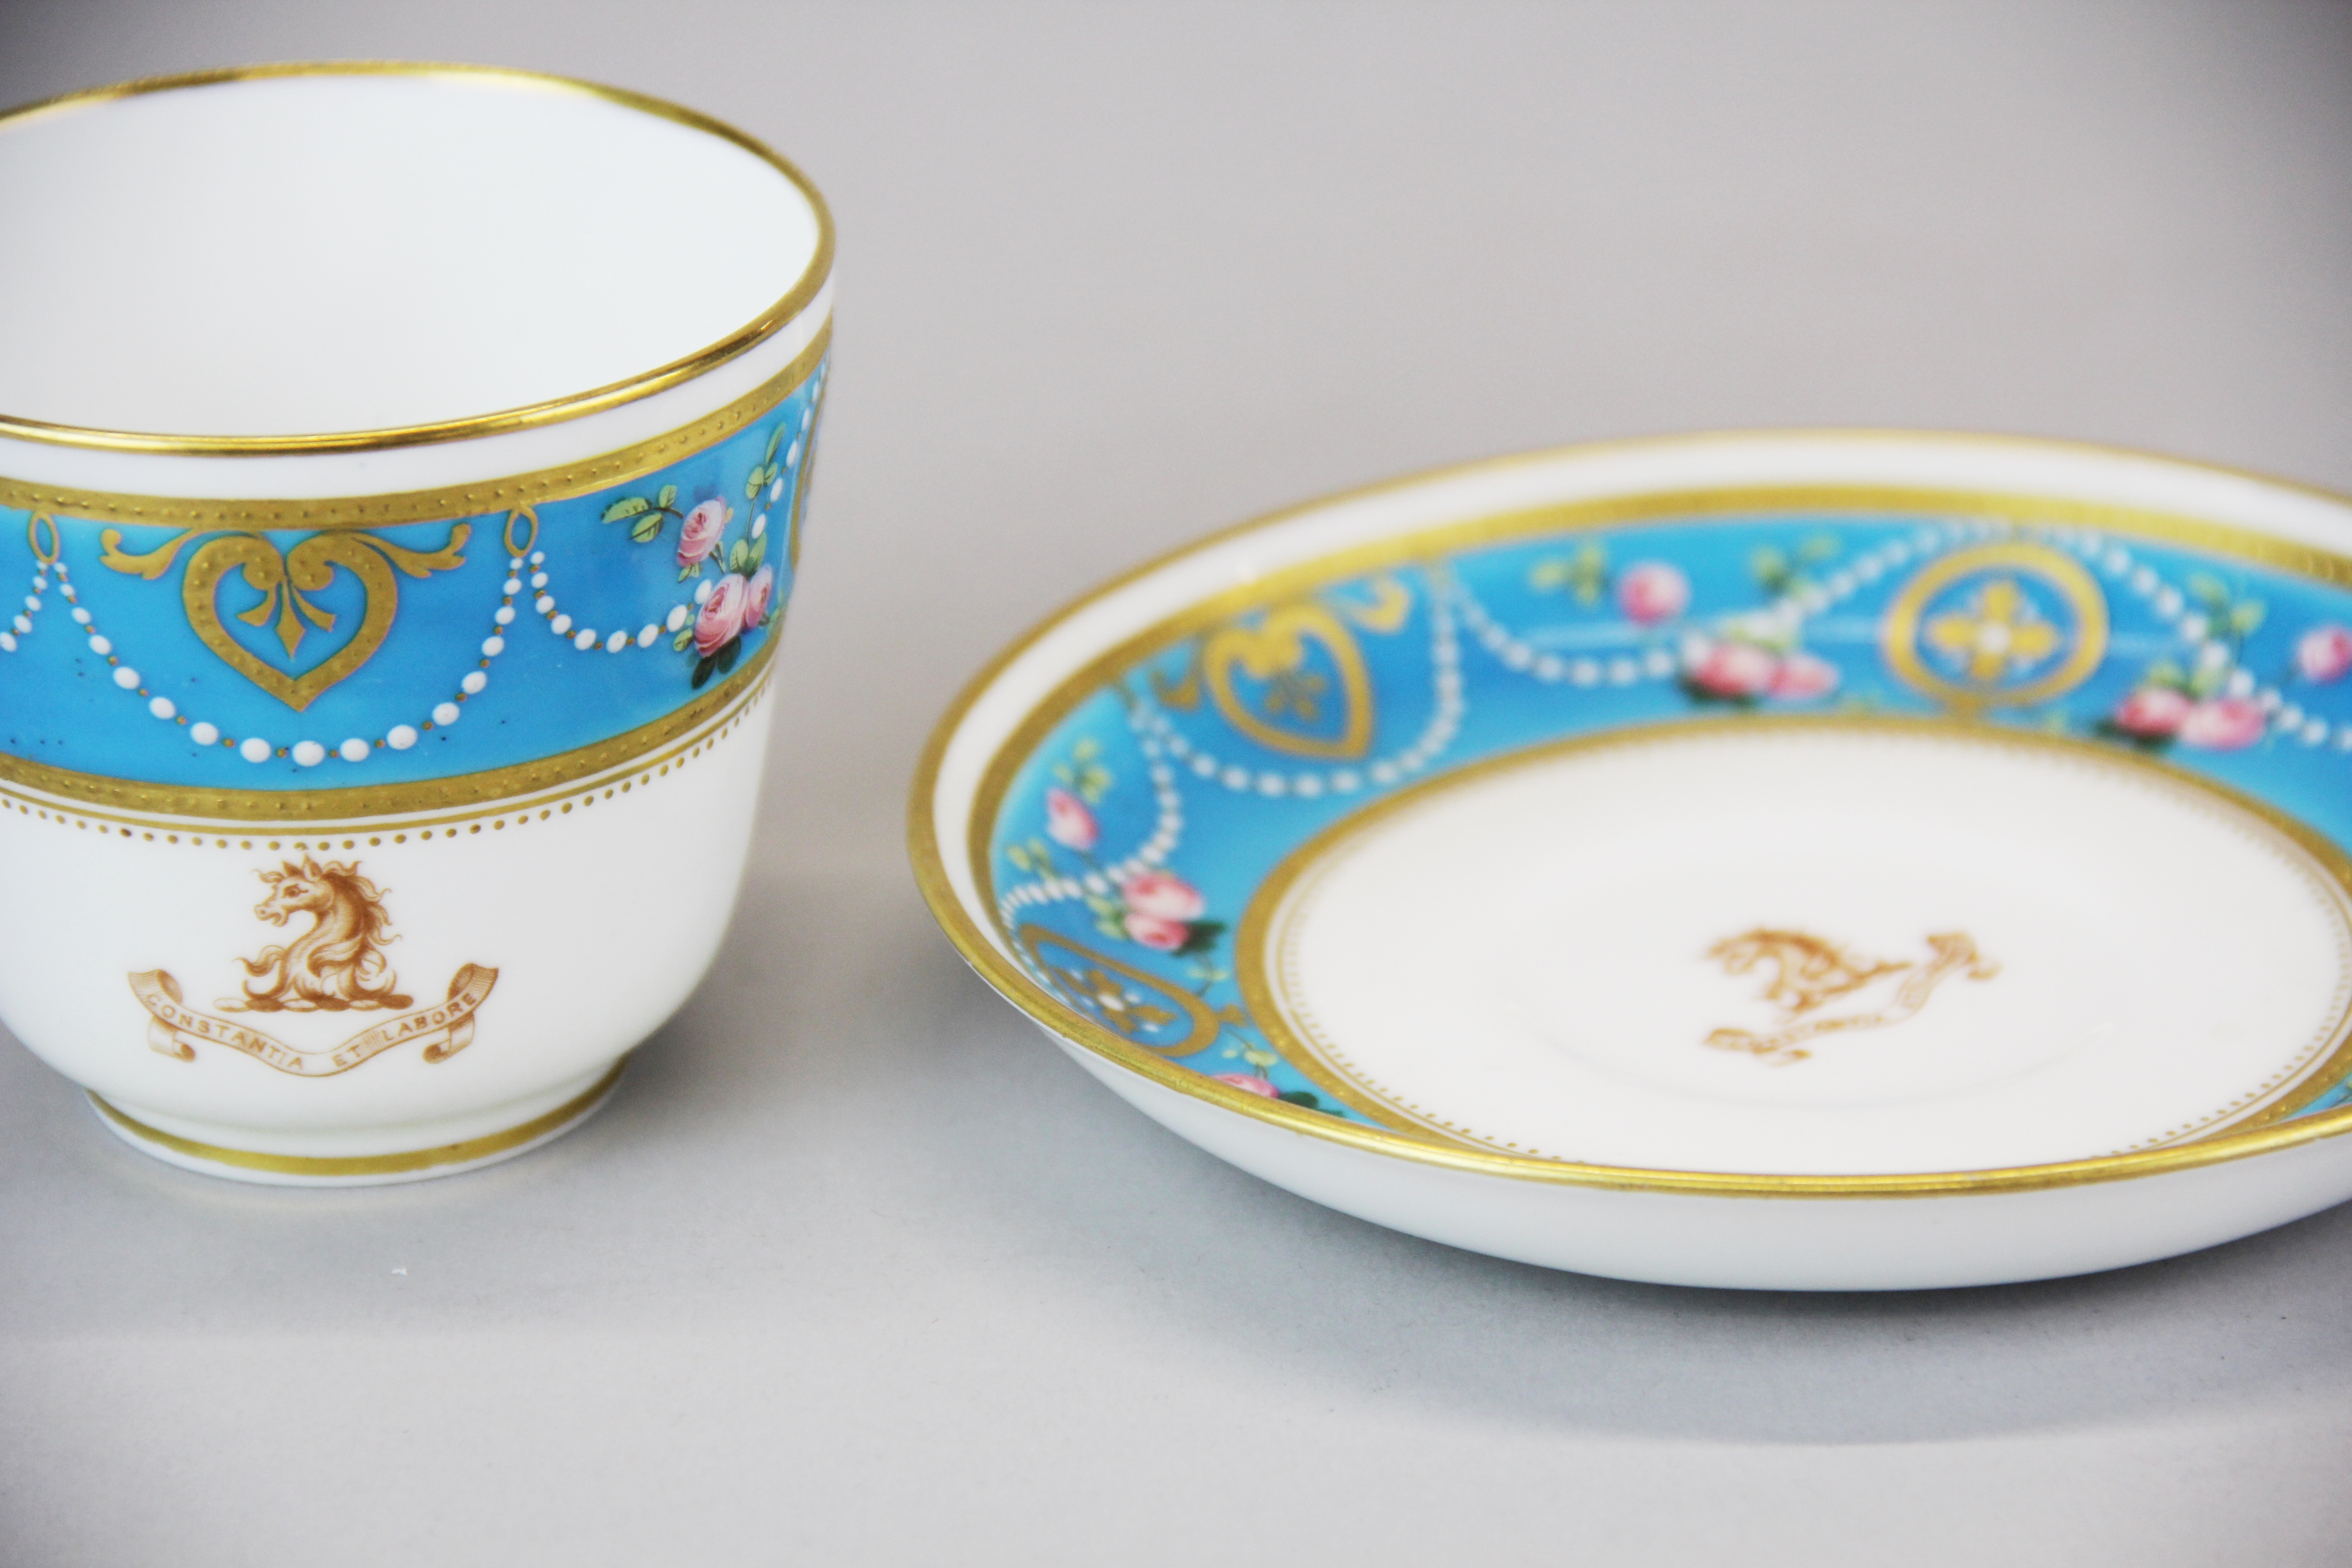 A fine mid 19th century Minton teacup and saucer. - Image 3 of 3